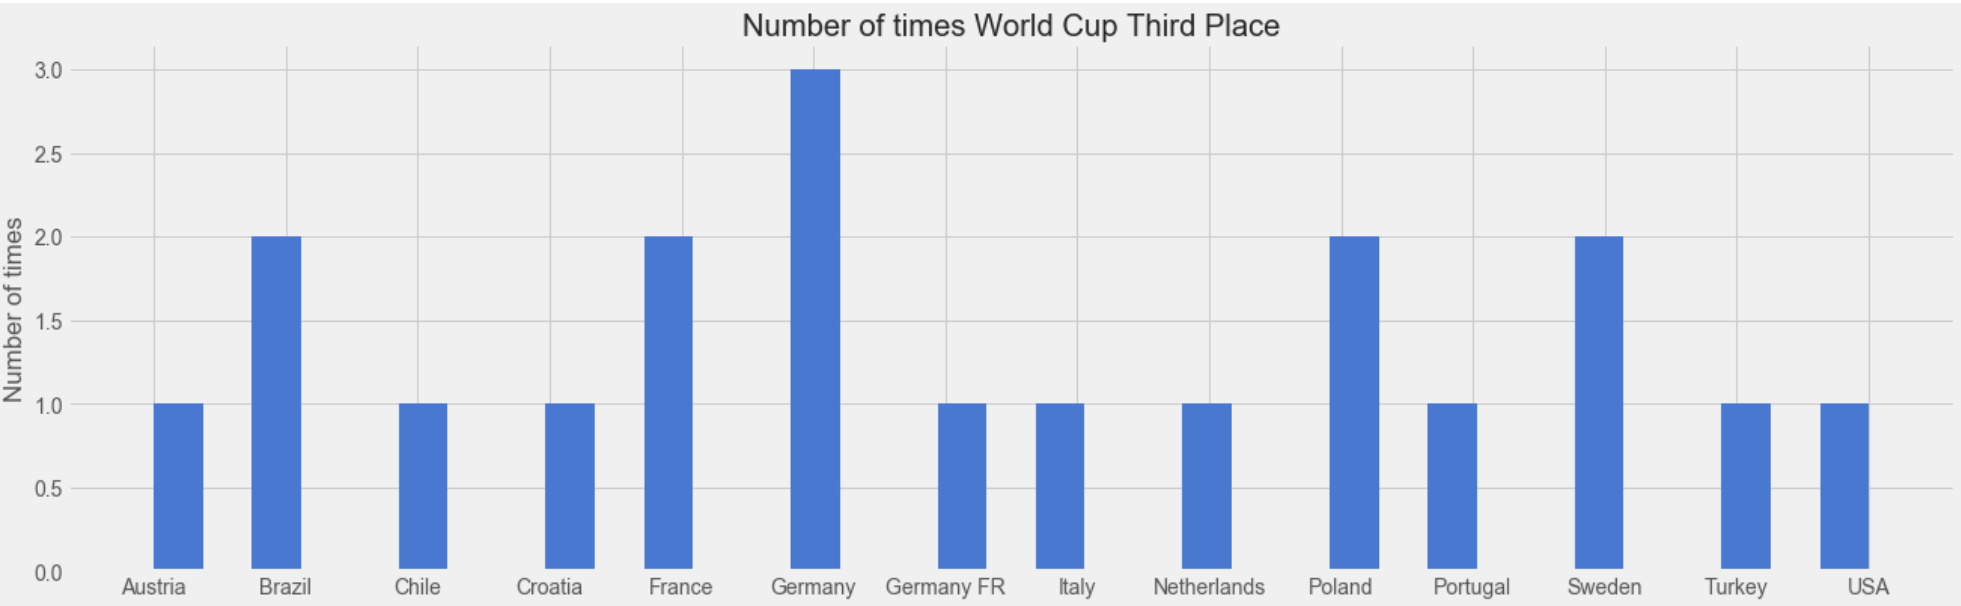 World Cup Third Place